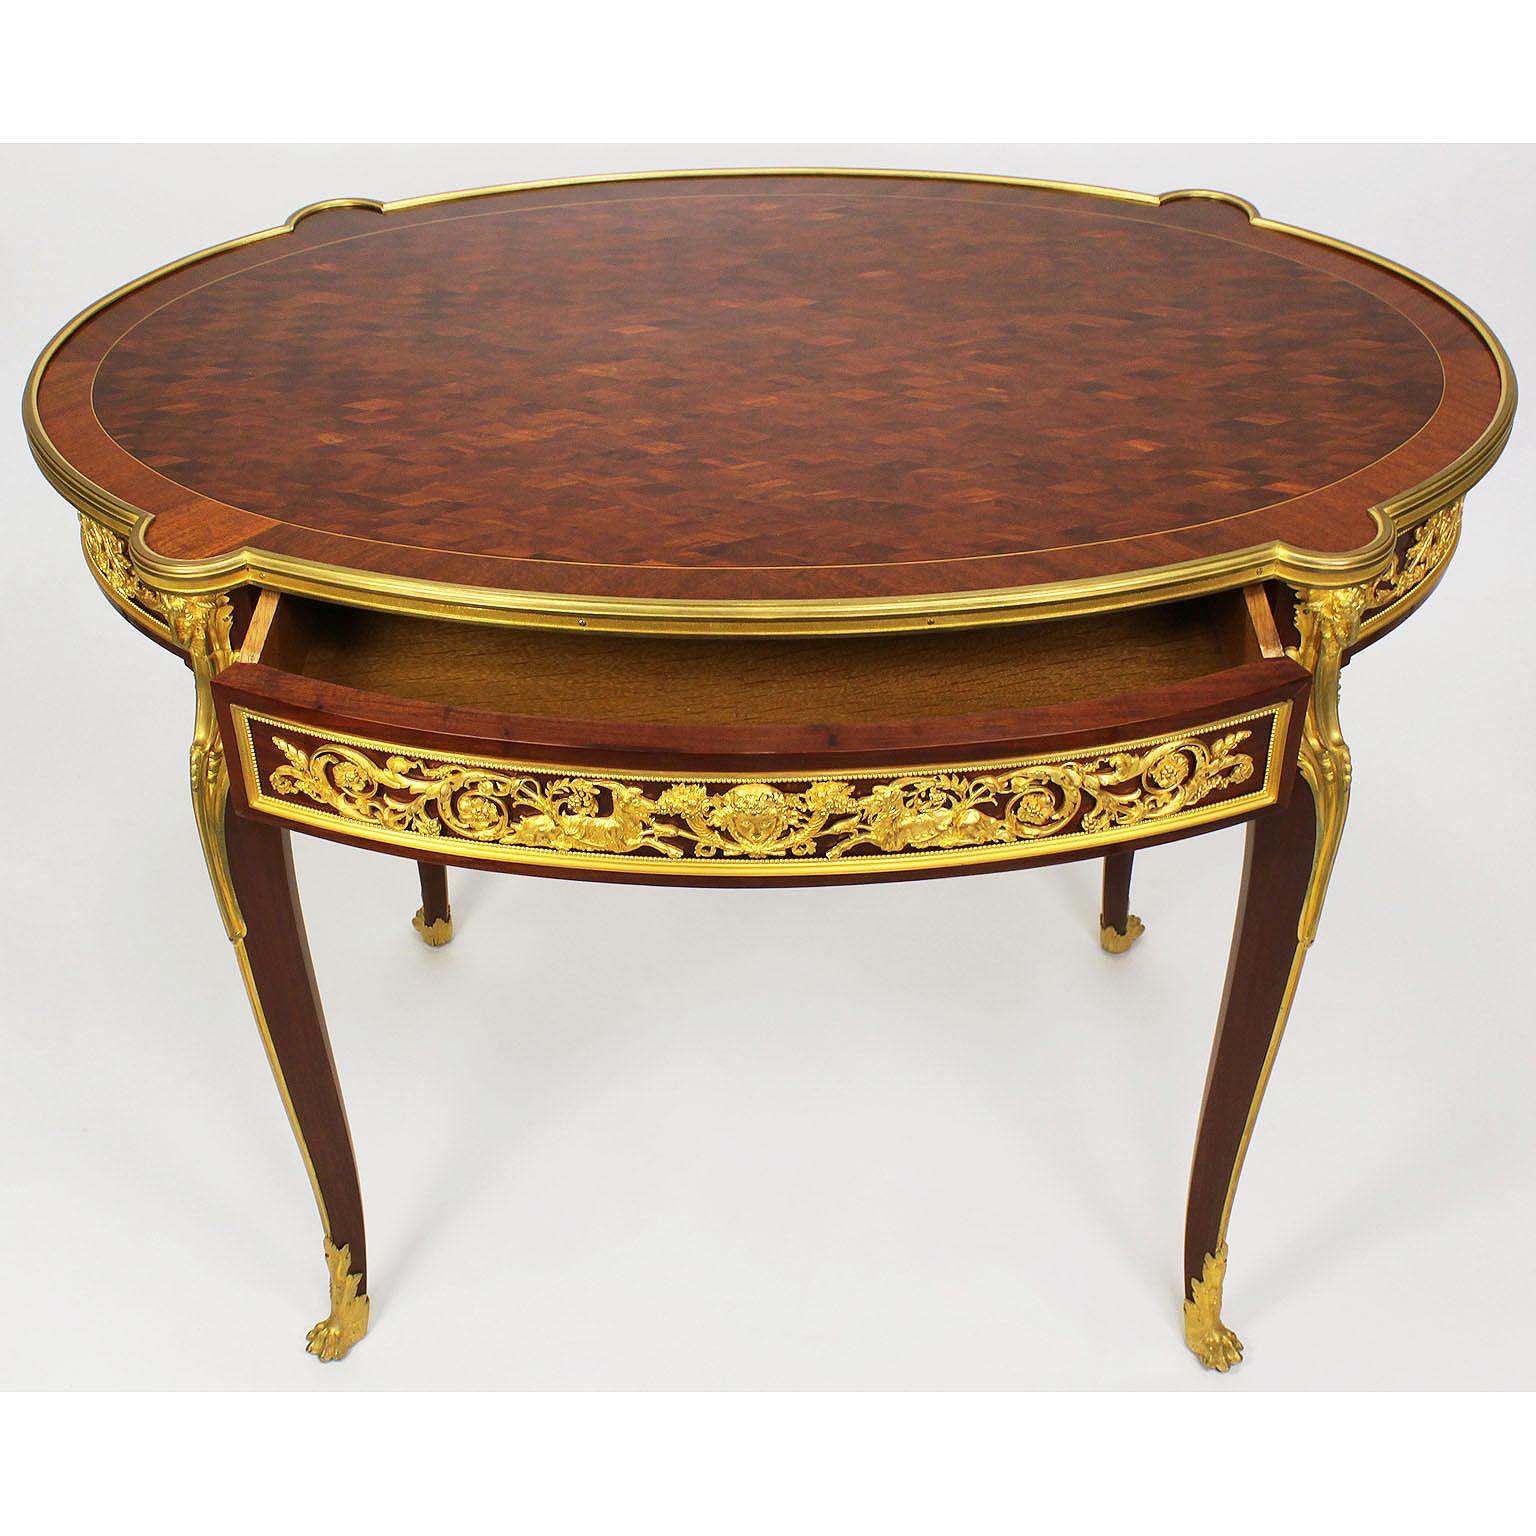 19th-20th Century Louis XV Gilt Bronze-Mounted Table, Francois Linke Attributed For Sale 1